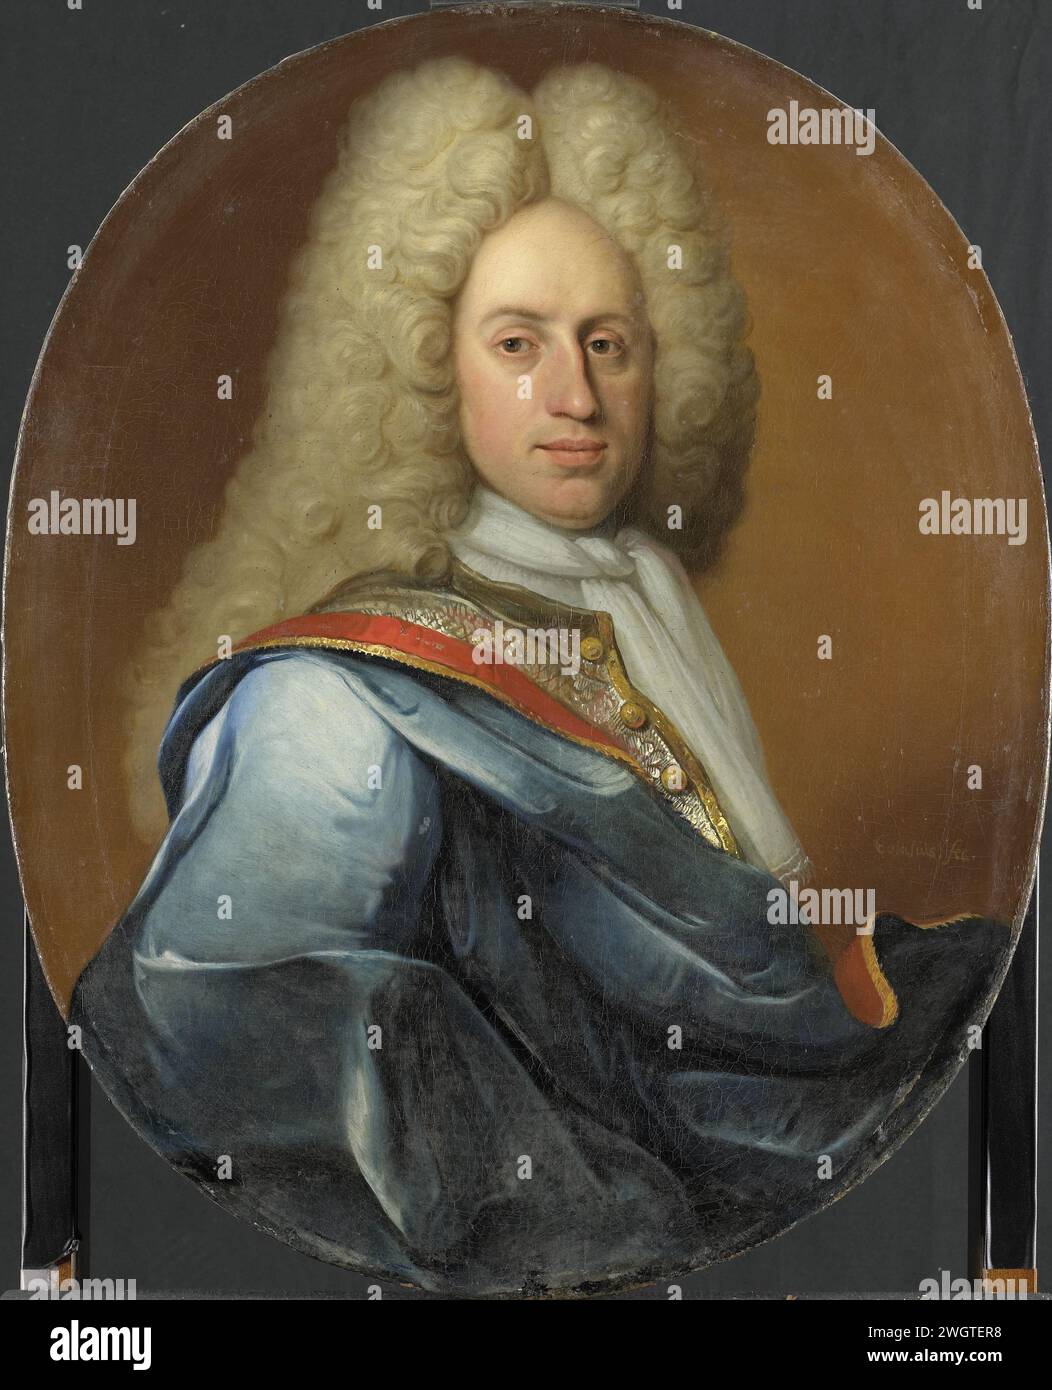 Hieronymus Josephus Boudaen, Lord of St Laurens and Popkensburg, Johan George Collasius, 1700 - 1750 painting Portrait of Hieronymus Josephus Boudaen, lord of St Laurens and Popkensburg. Bust, with a long white wig.  canvas. oil paint (paint)  historical persons Stock Photo